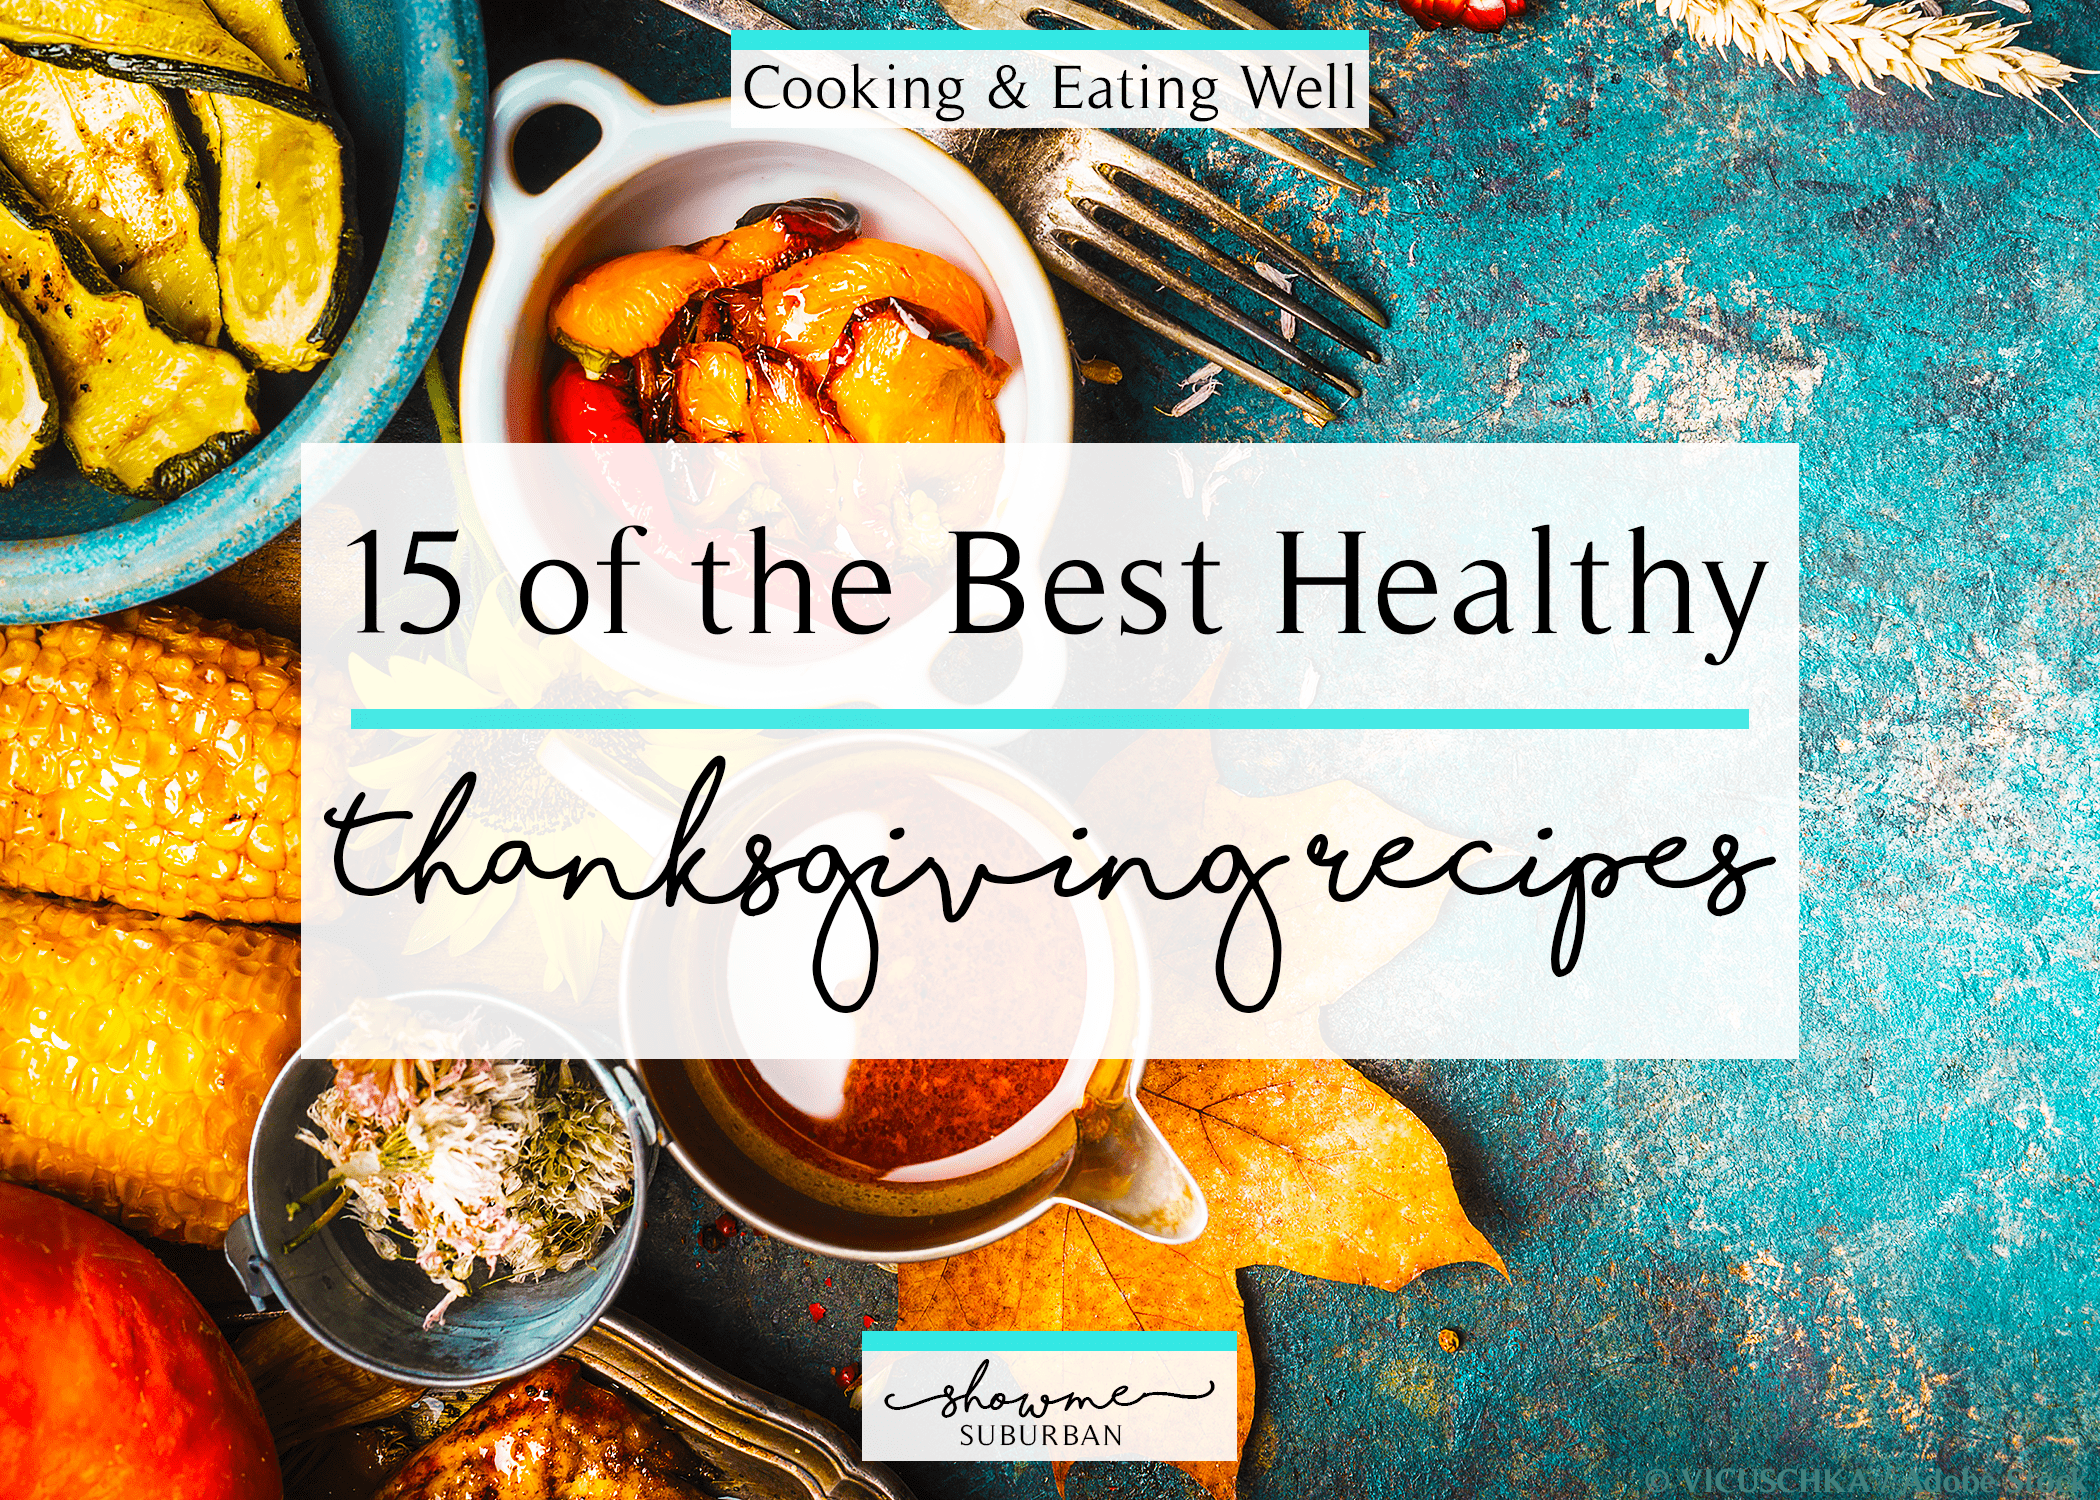 15 of the Best Healthy Thanksgiving Recipes - ShowMe Suburban